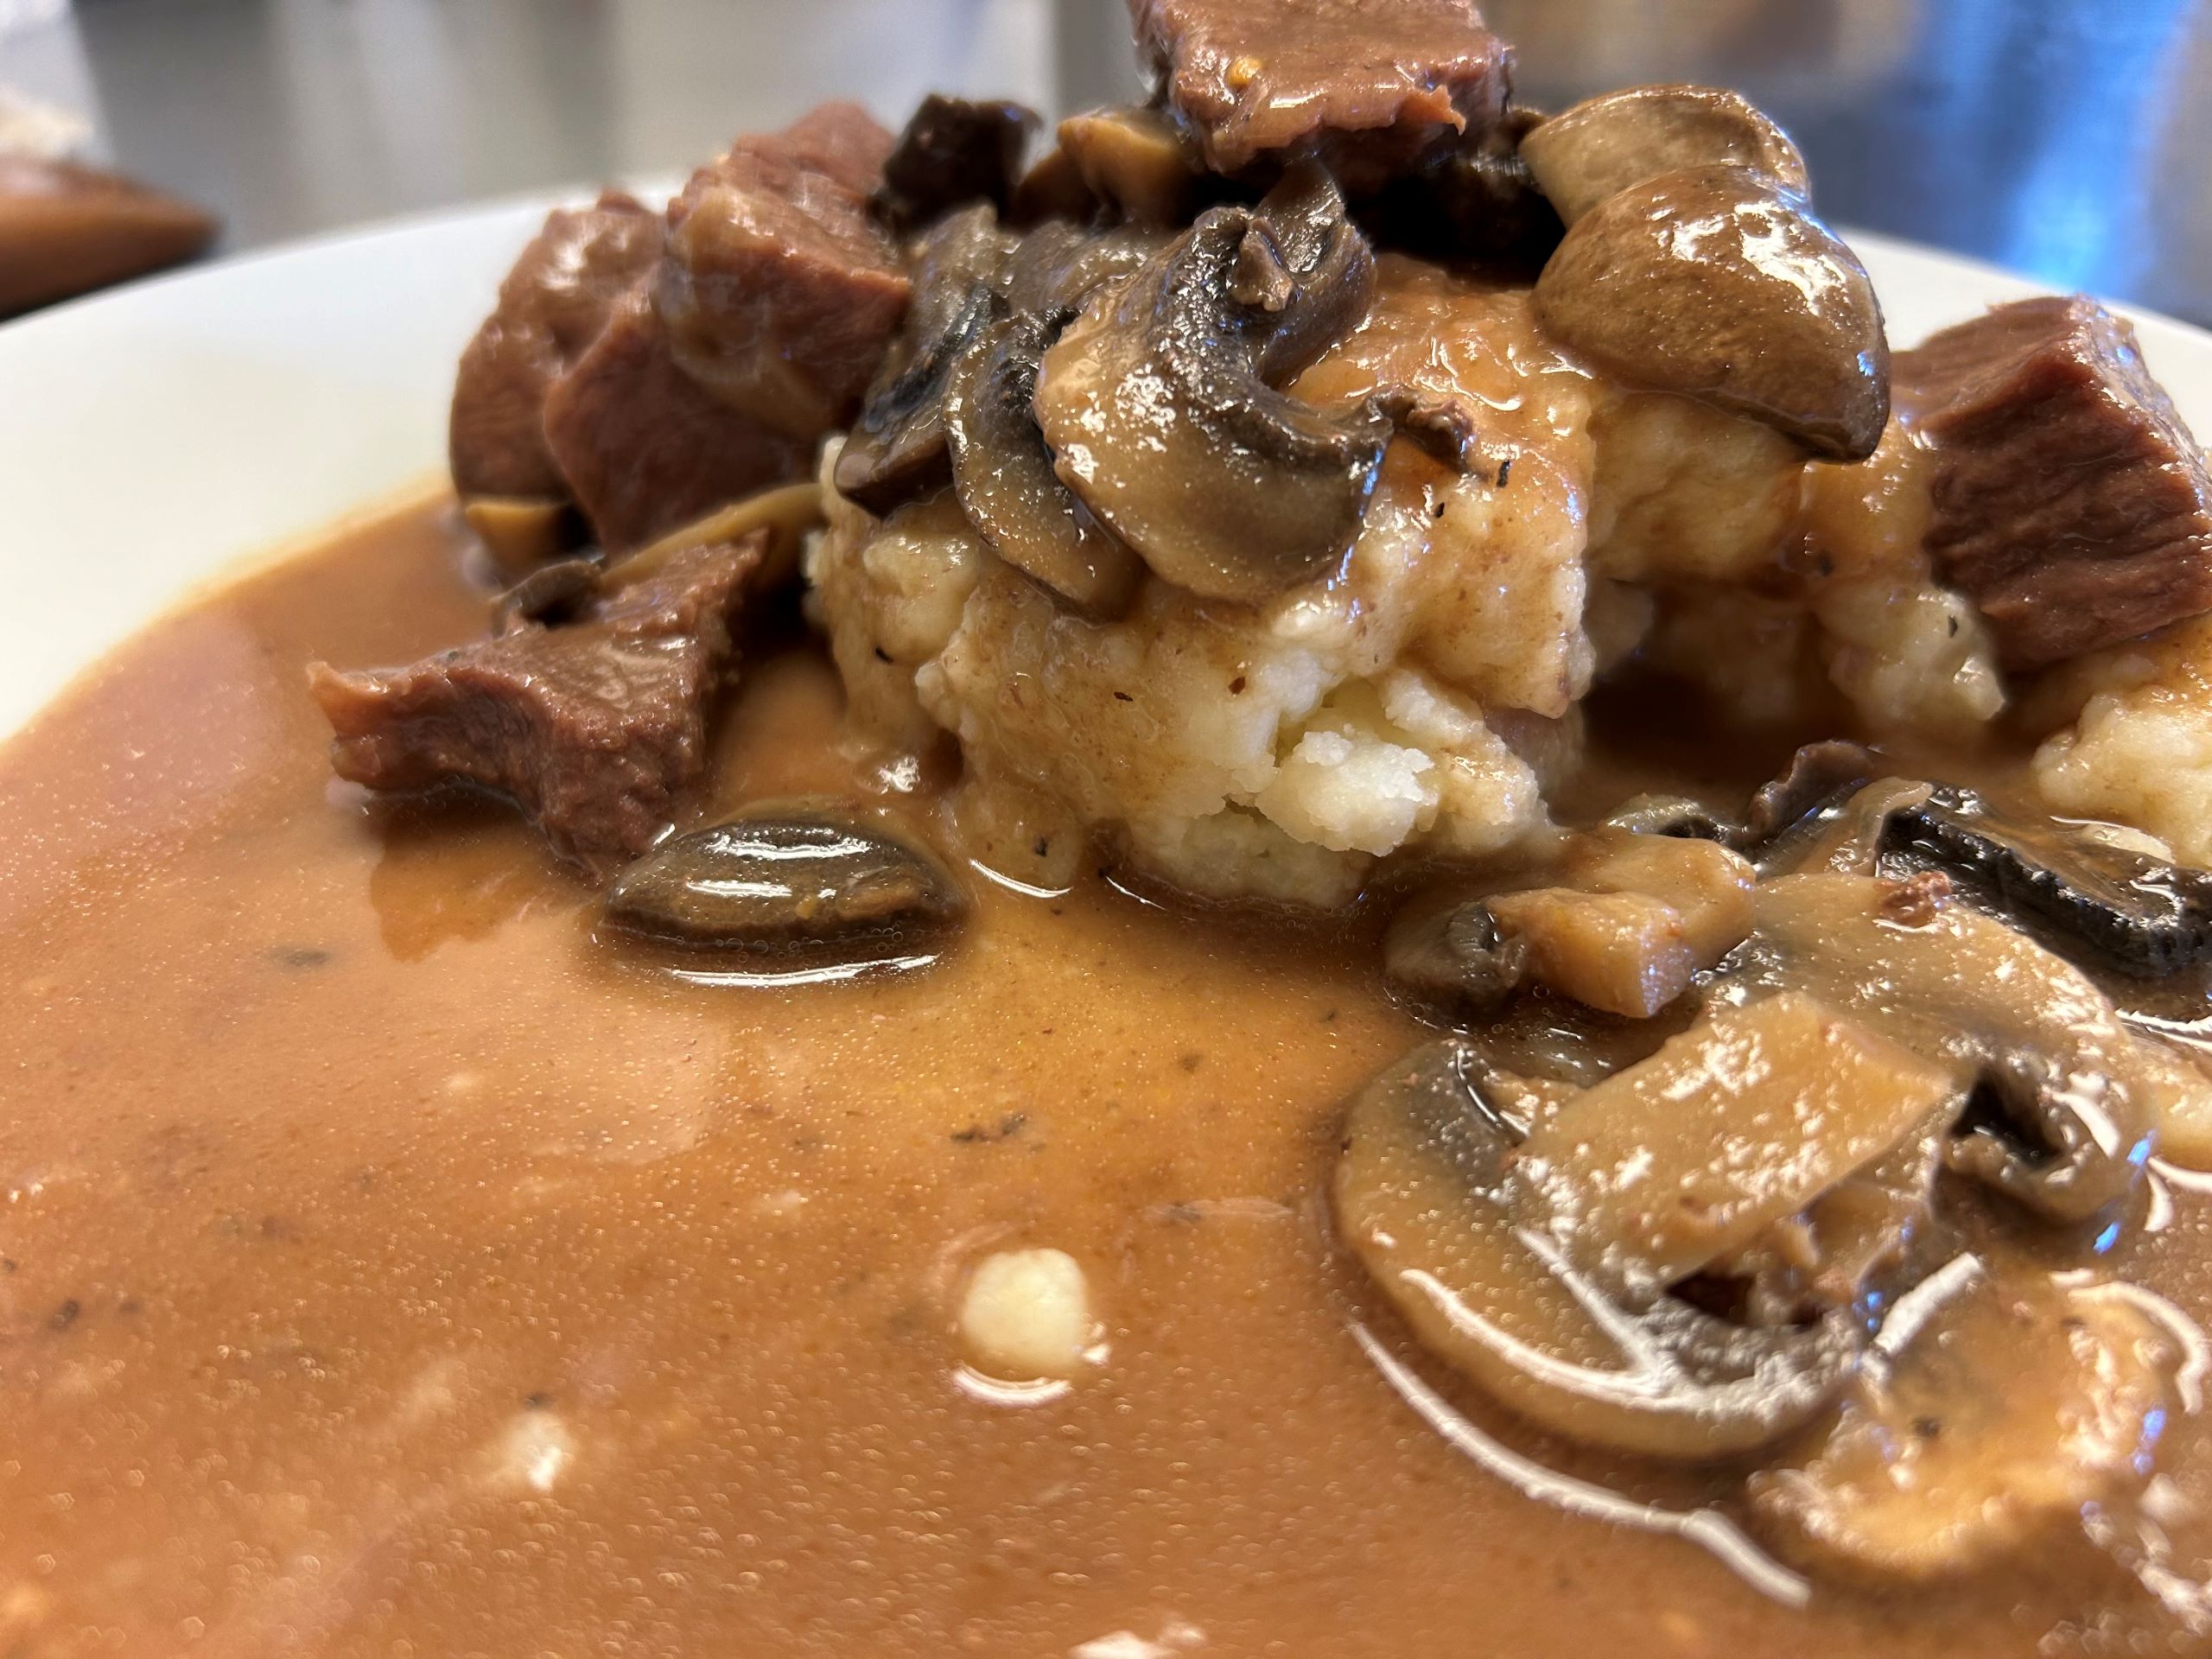 Kat's Coffee Infused Pork slow cooked in chardonnay and mushroom flavored served with sliced and whole mushrooms on mashed potatoes on a white plate.